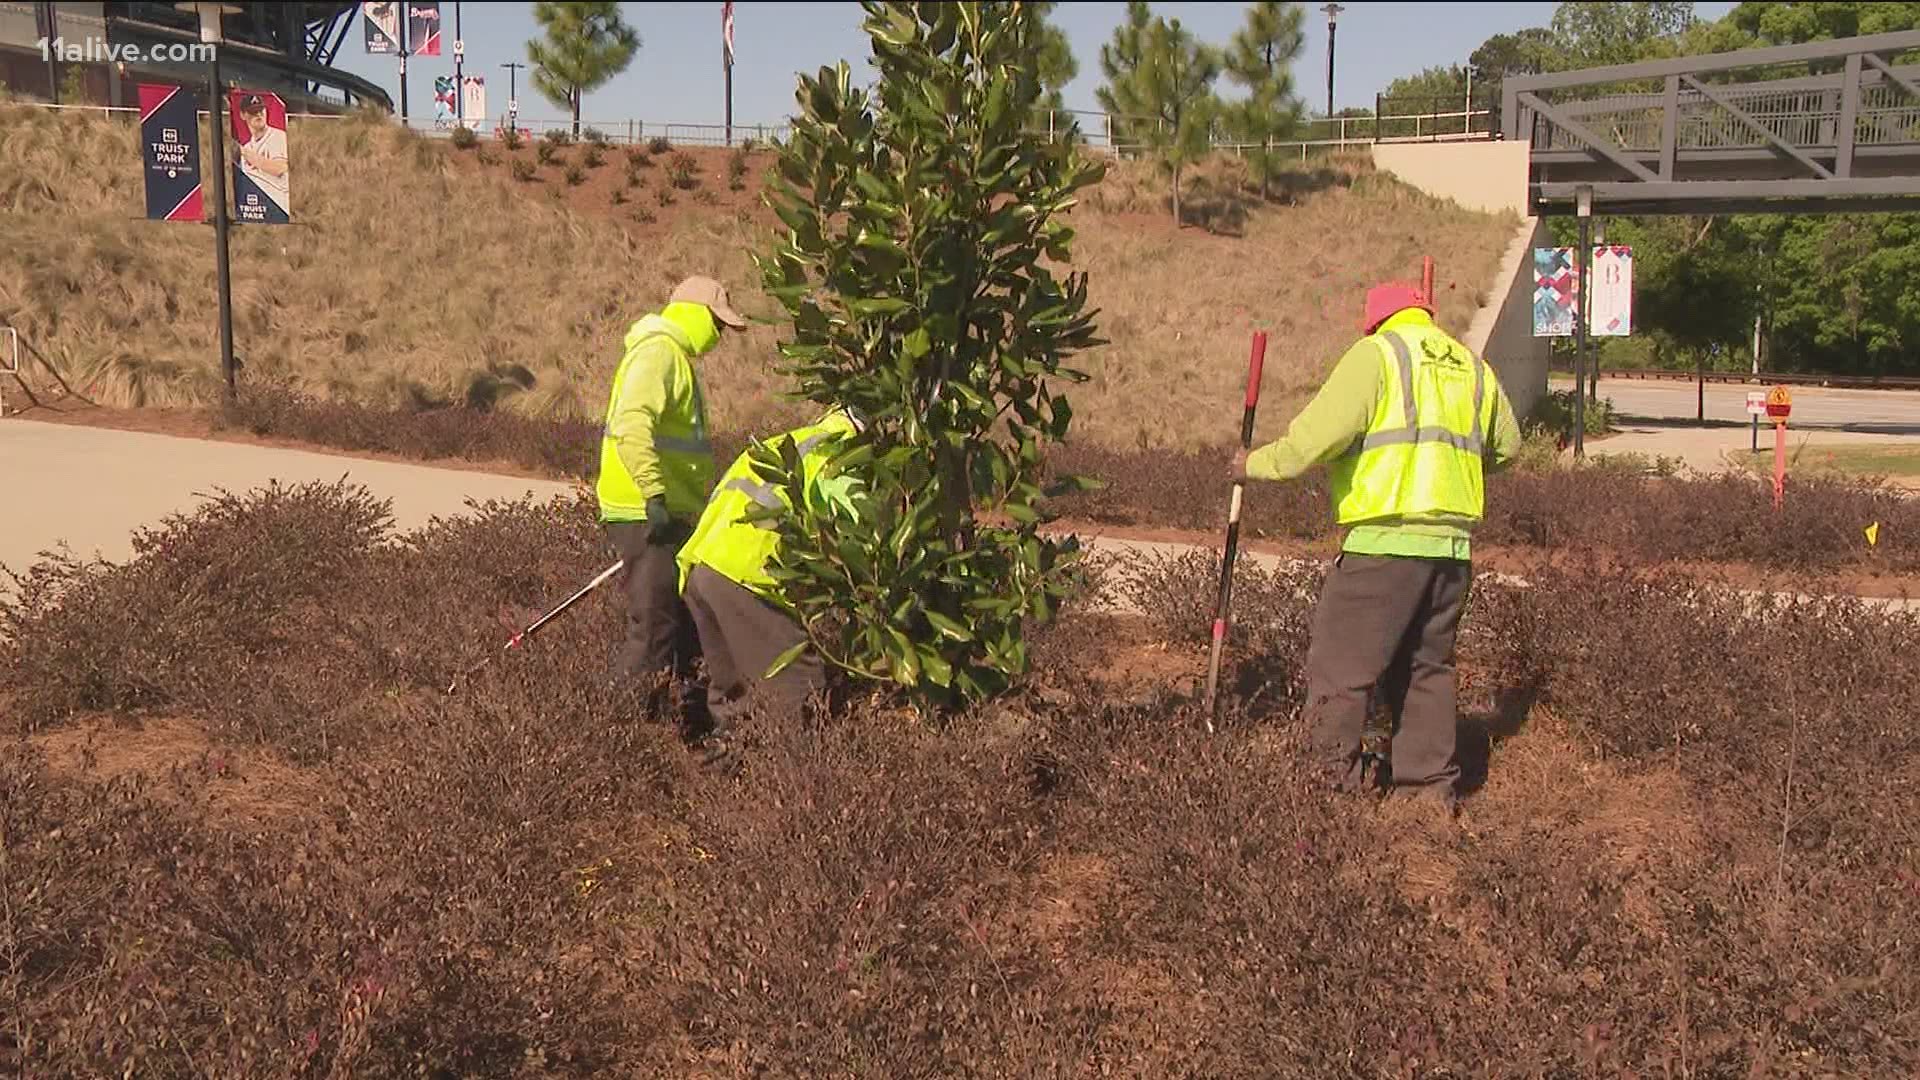 Here's what landscapers did at Truist Park on Earth Day.